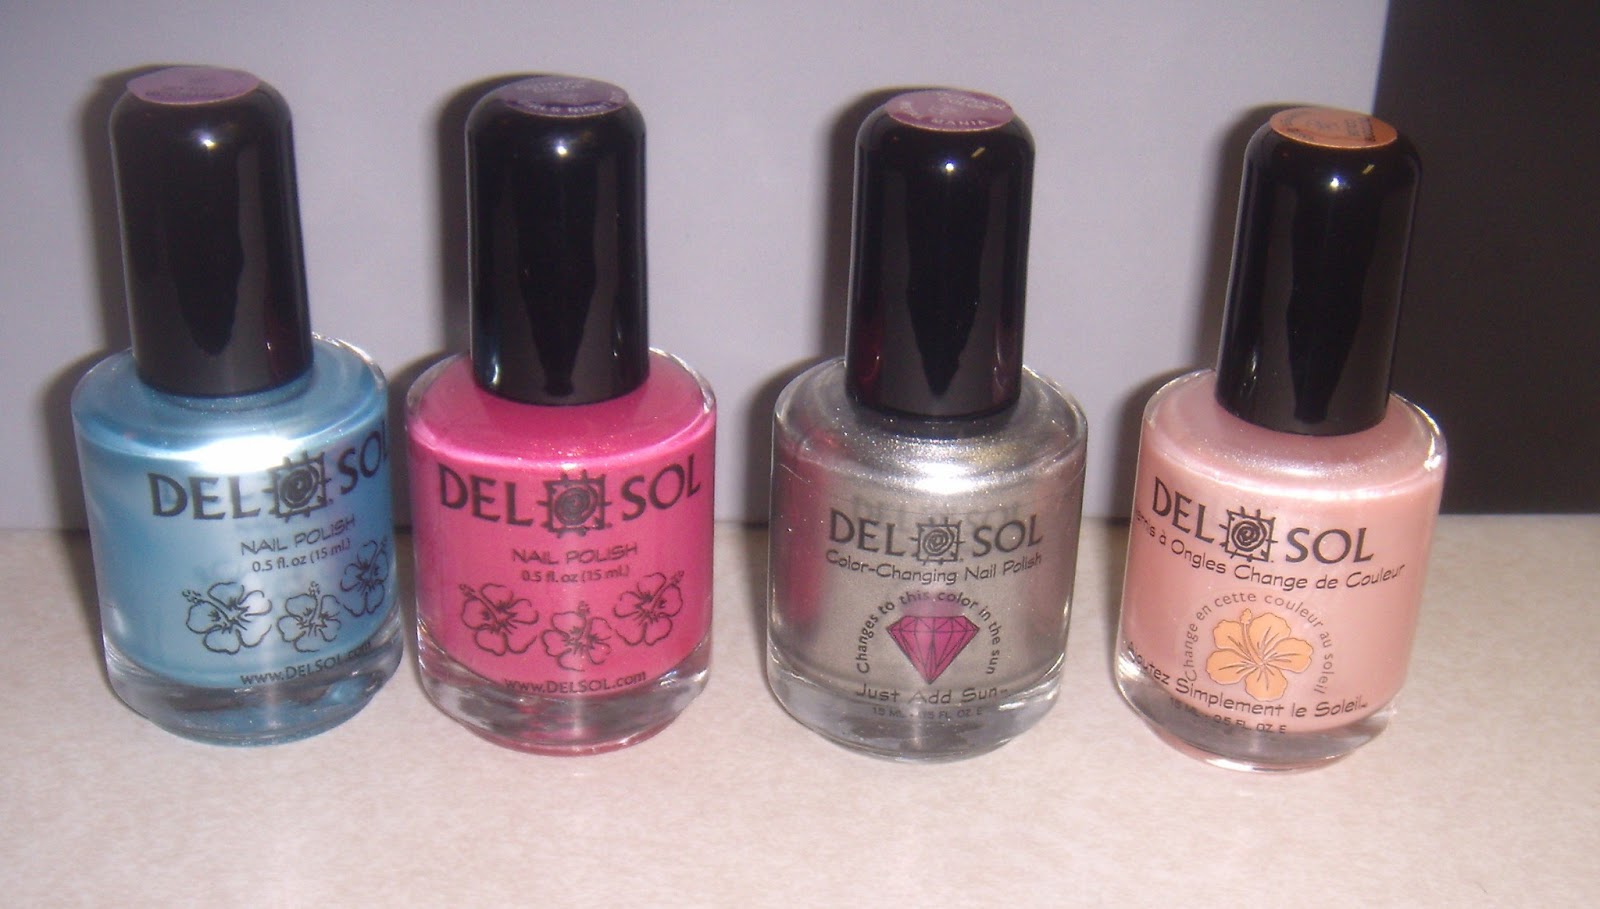 1. Del Sol Color Changing Nail Polish - wide 7